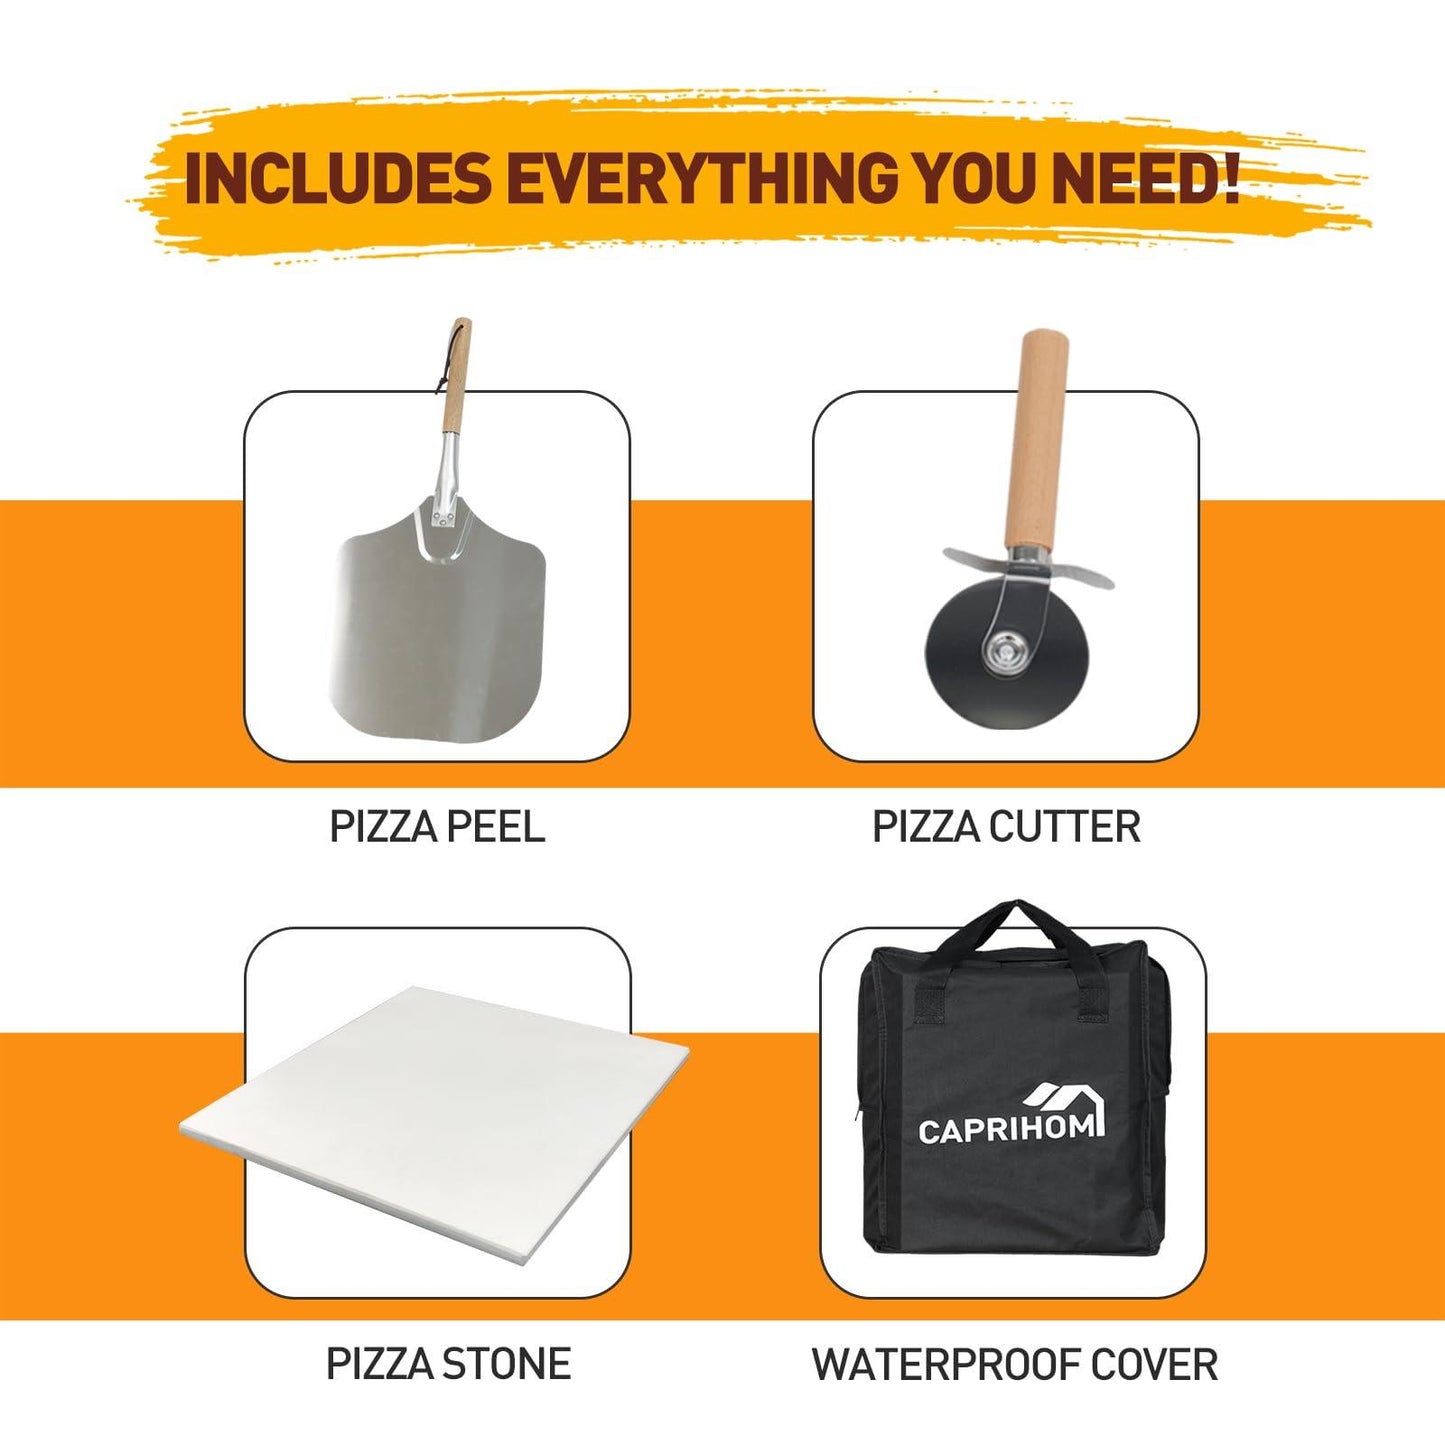 Caprihom Pizza Box for Grill - Portable Grill Top Pizza Oven with 12" Pizza Stone, Pizza Peel - Pizza Box for Charcoal Grill, Gas Grill - CookCave